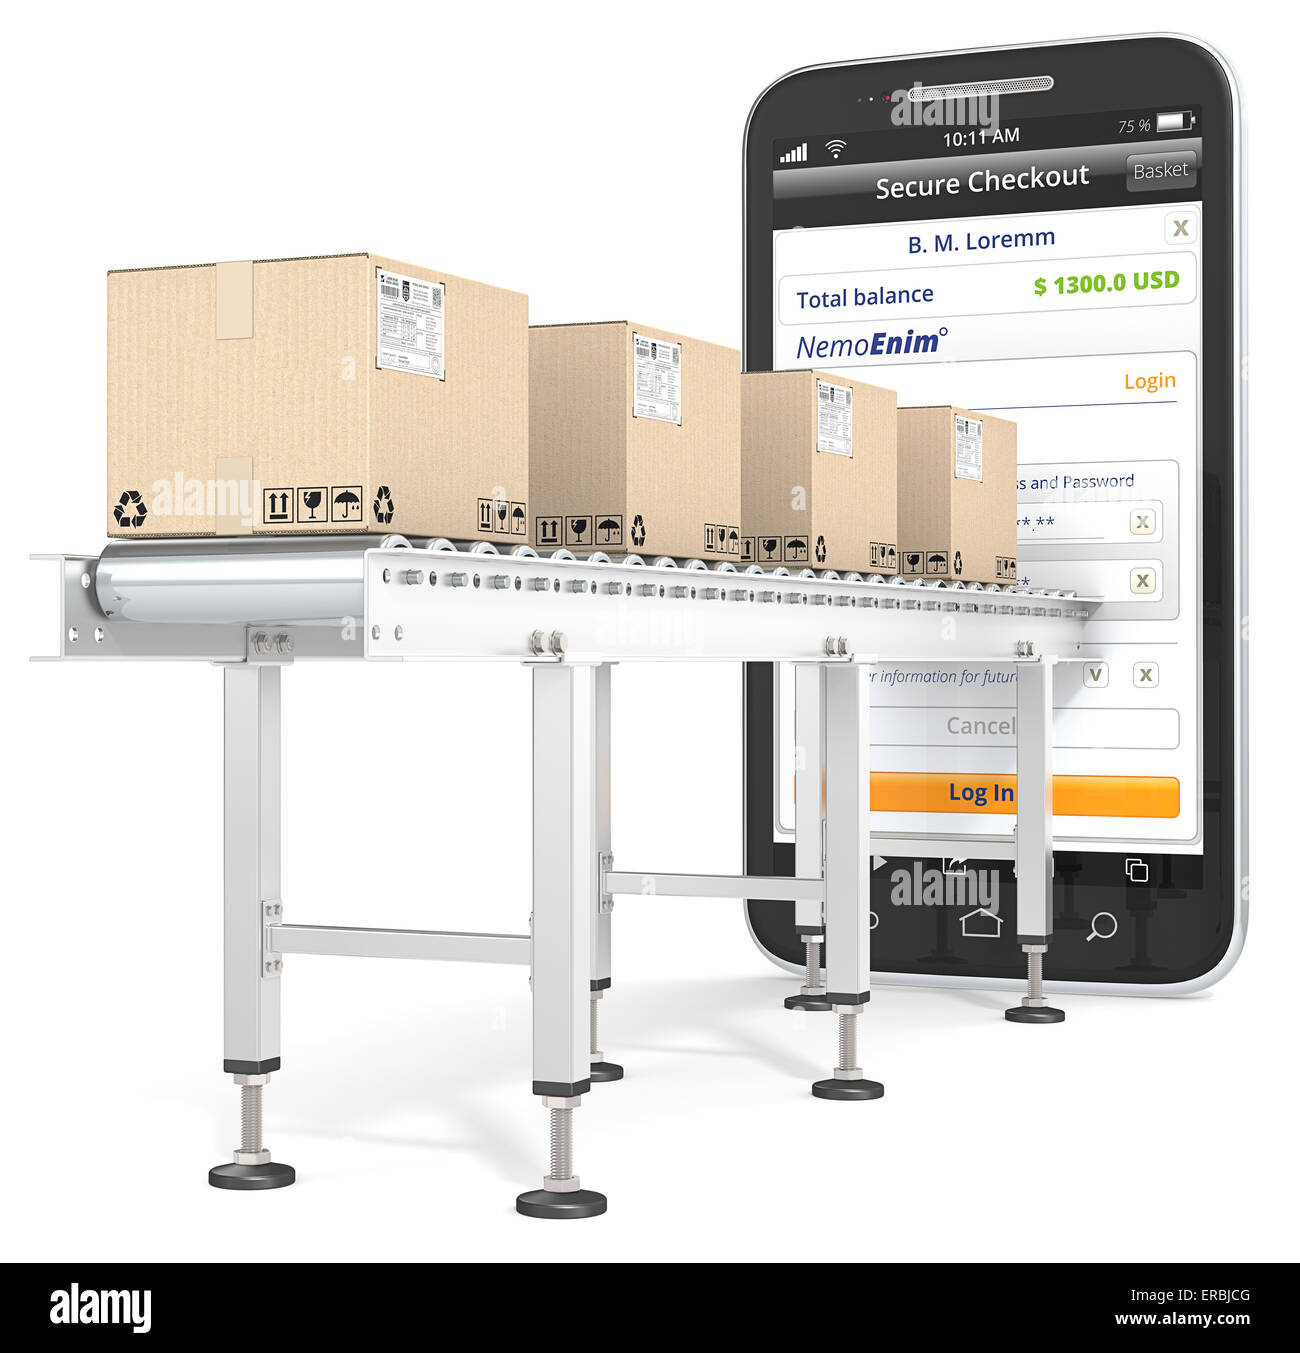 Industrial Conveyor with cardboard Boxes connected to Smartphone. Checkout page. Stock Photo